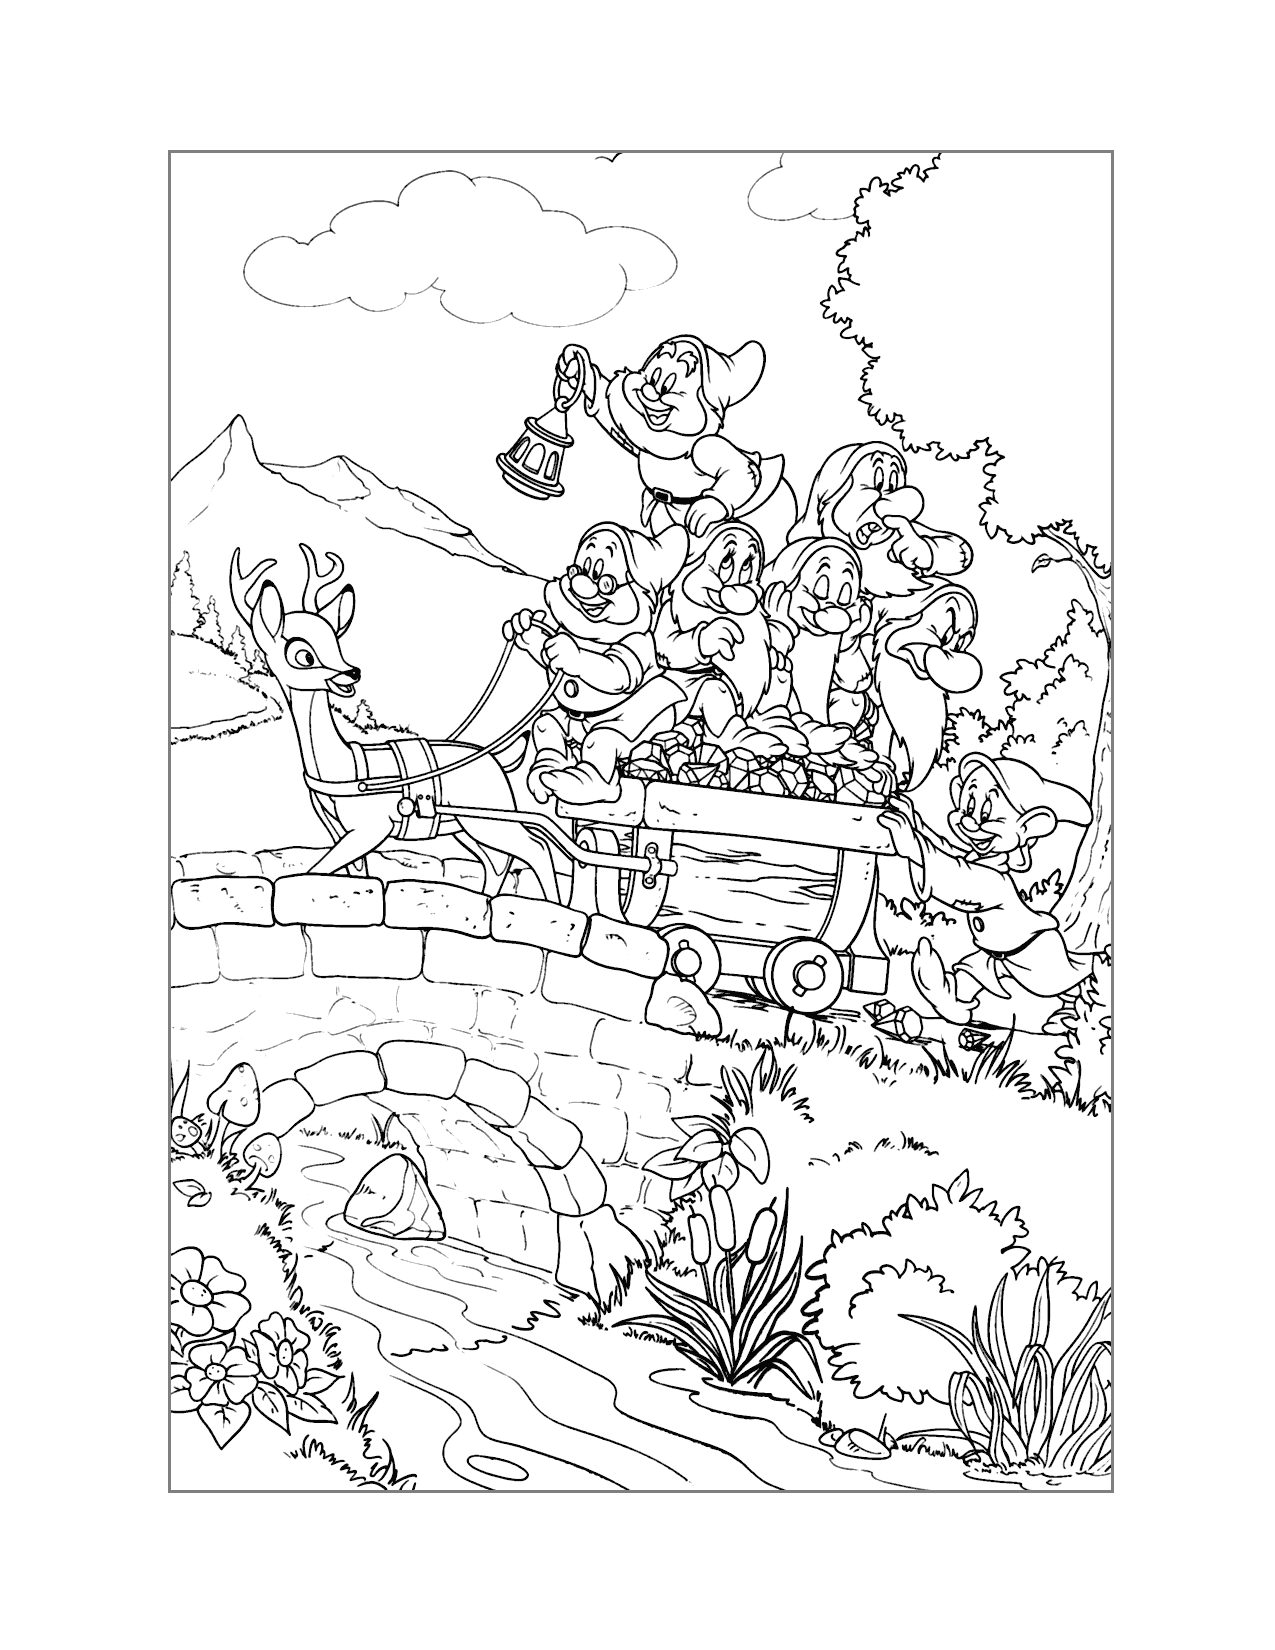 Seven Dwarf Deer Carriage Ride Coloring Page